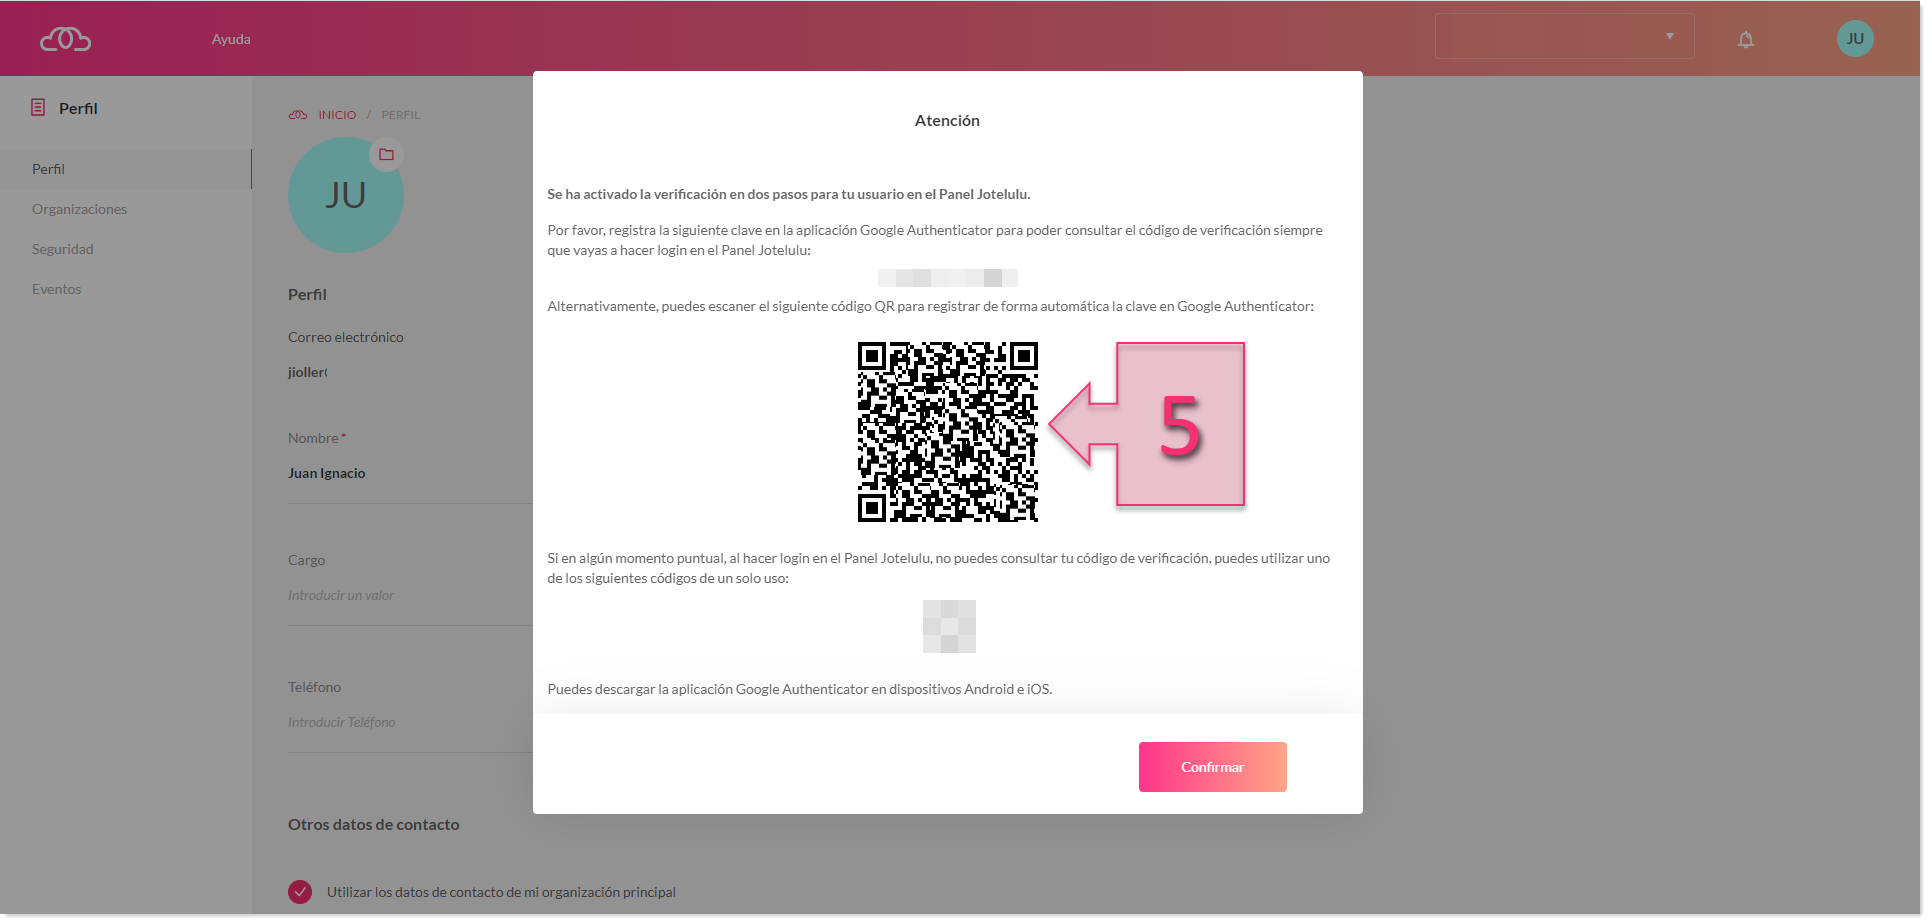 Part 2 - Load the new user key by scanning the QR code